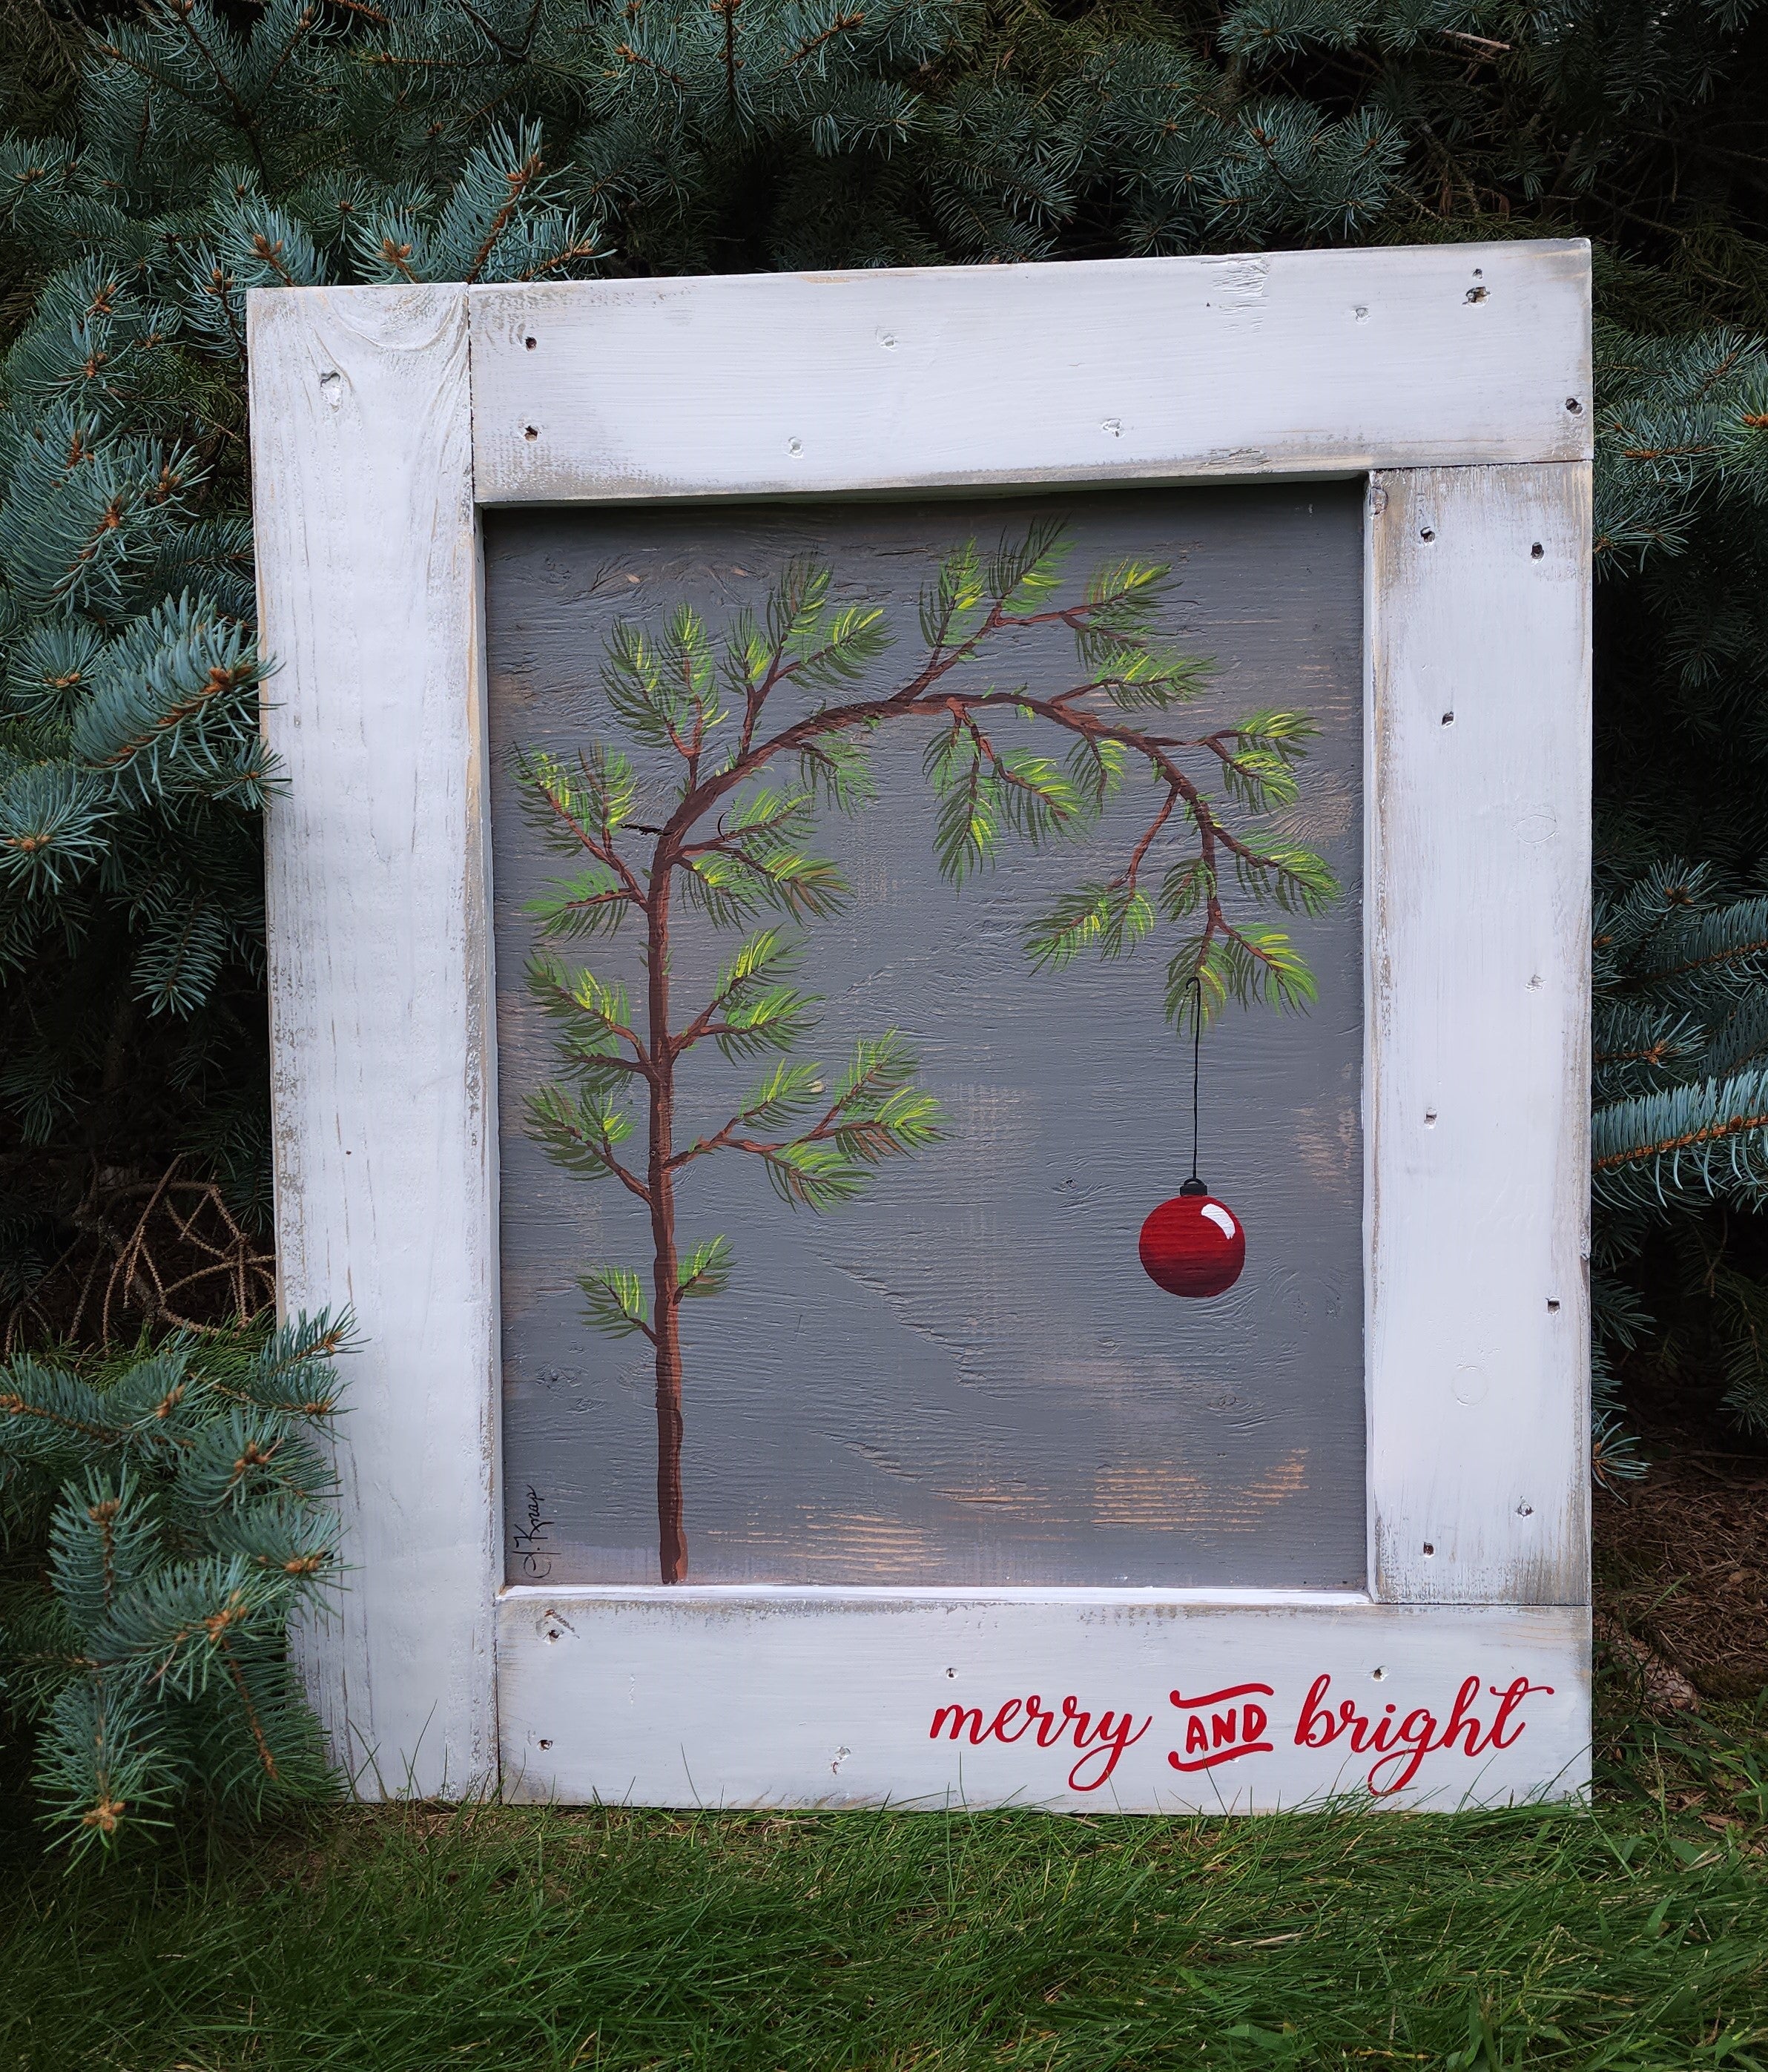 Hand painted Charlie B Christmas tree on recycled pallet wood, Red "Merry and Bright" word sign, classic red Christmas bulb, white frame